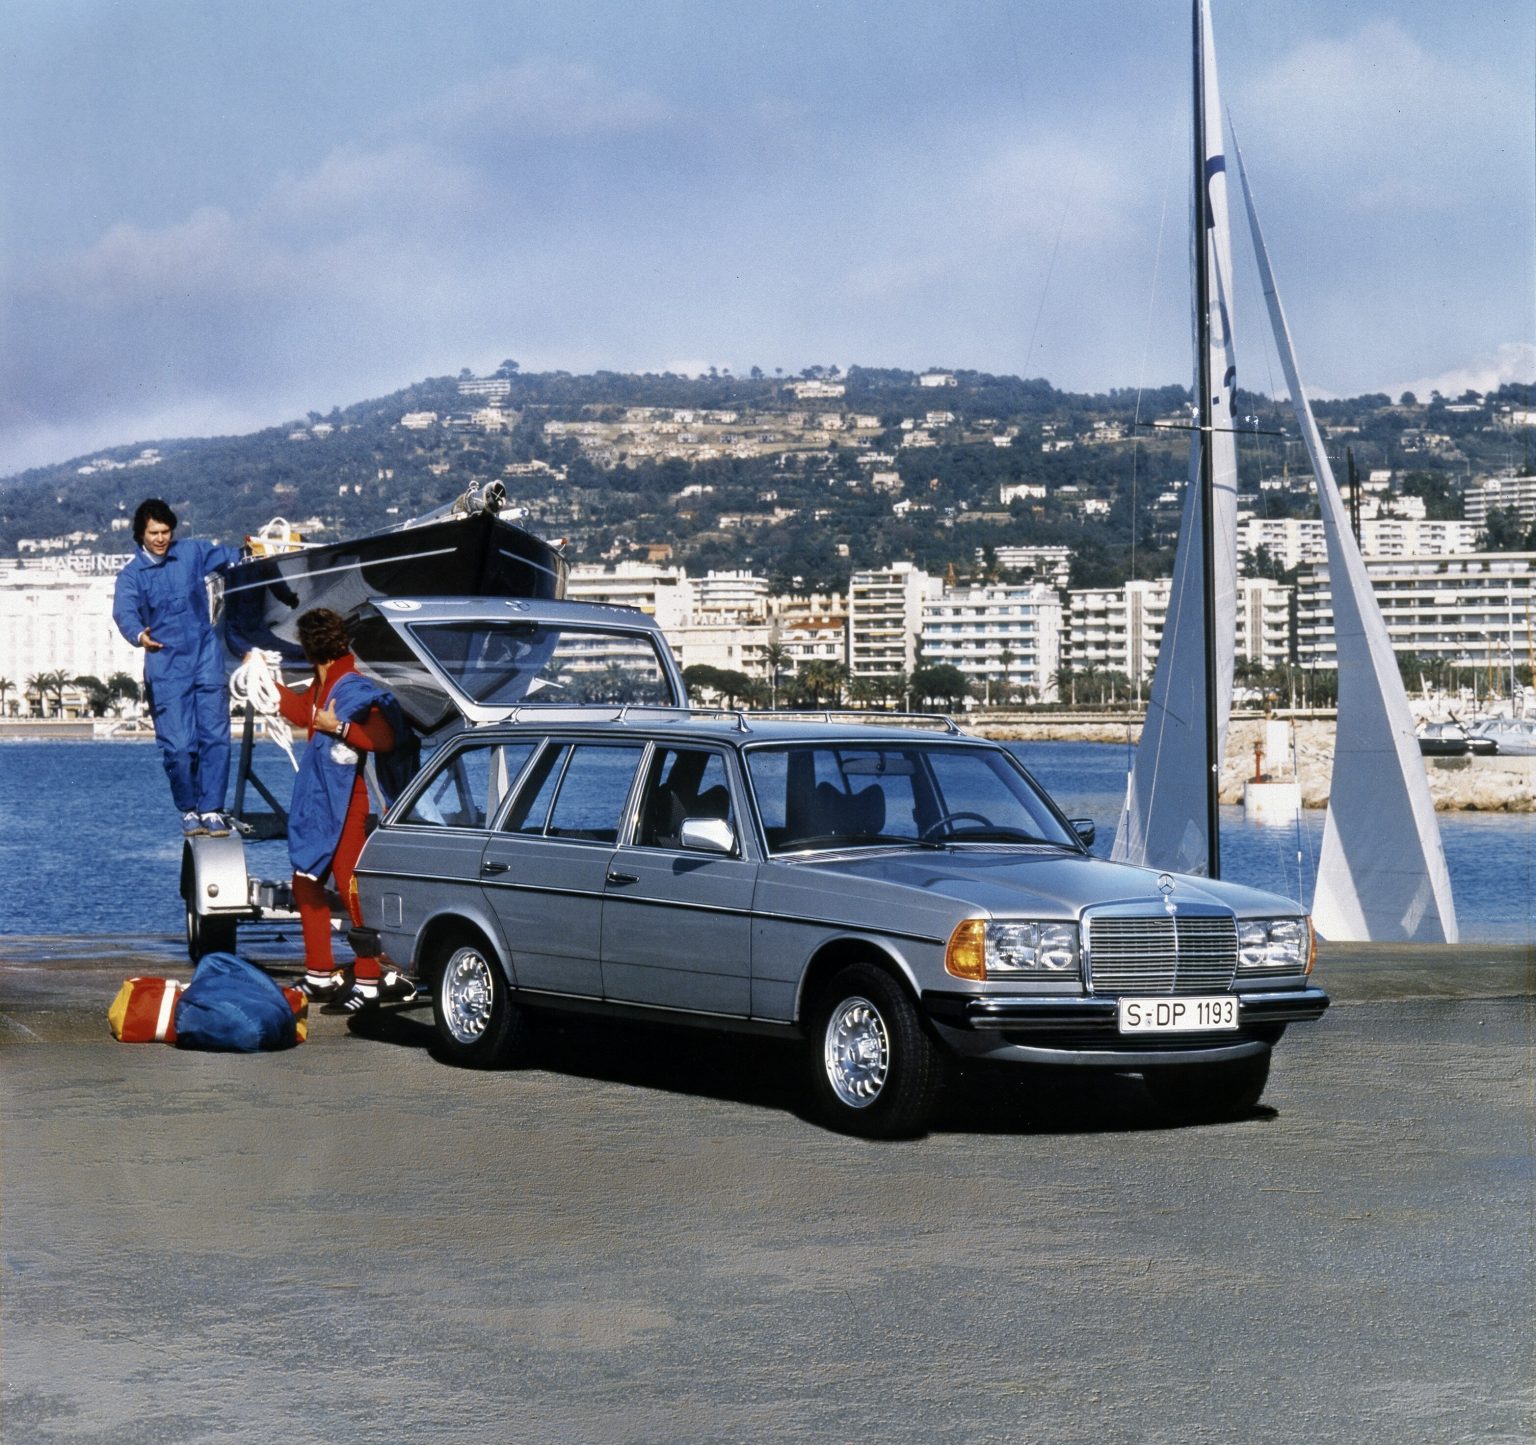 Mercedes-Benz Estate S123. Genre photo from 1977. The Estate set standards for leisure and family vehicles.